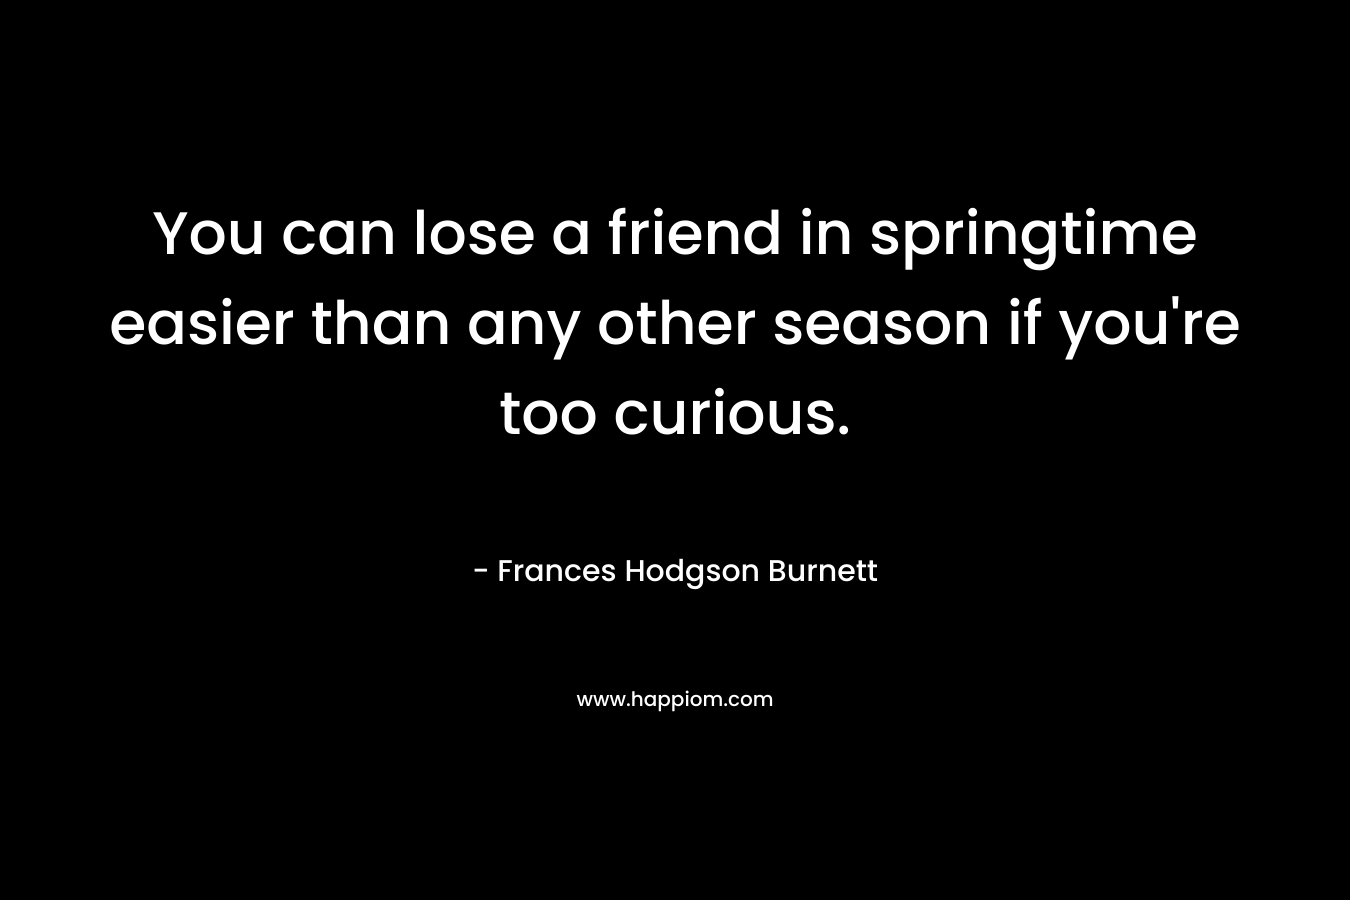 You can lose a friend in springtime easier than any other season if you’re too curious. – Frances Hodgson Burnett